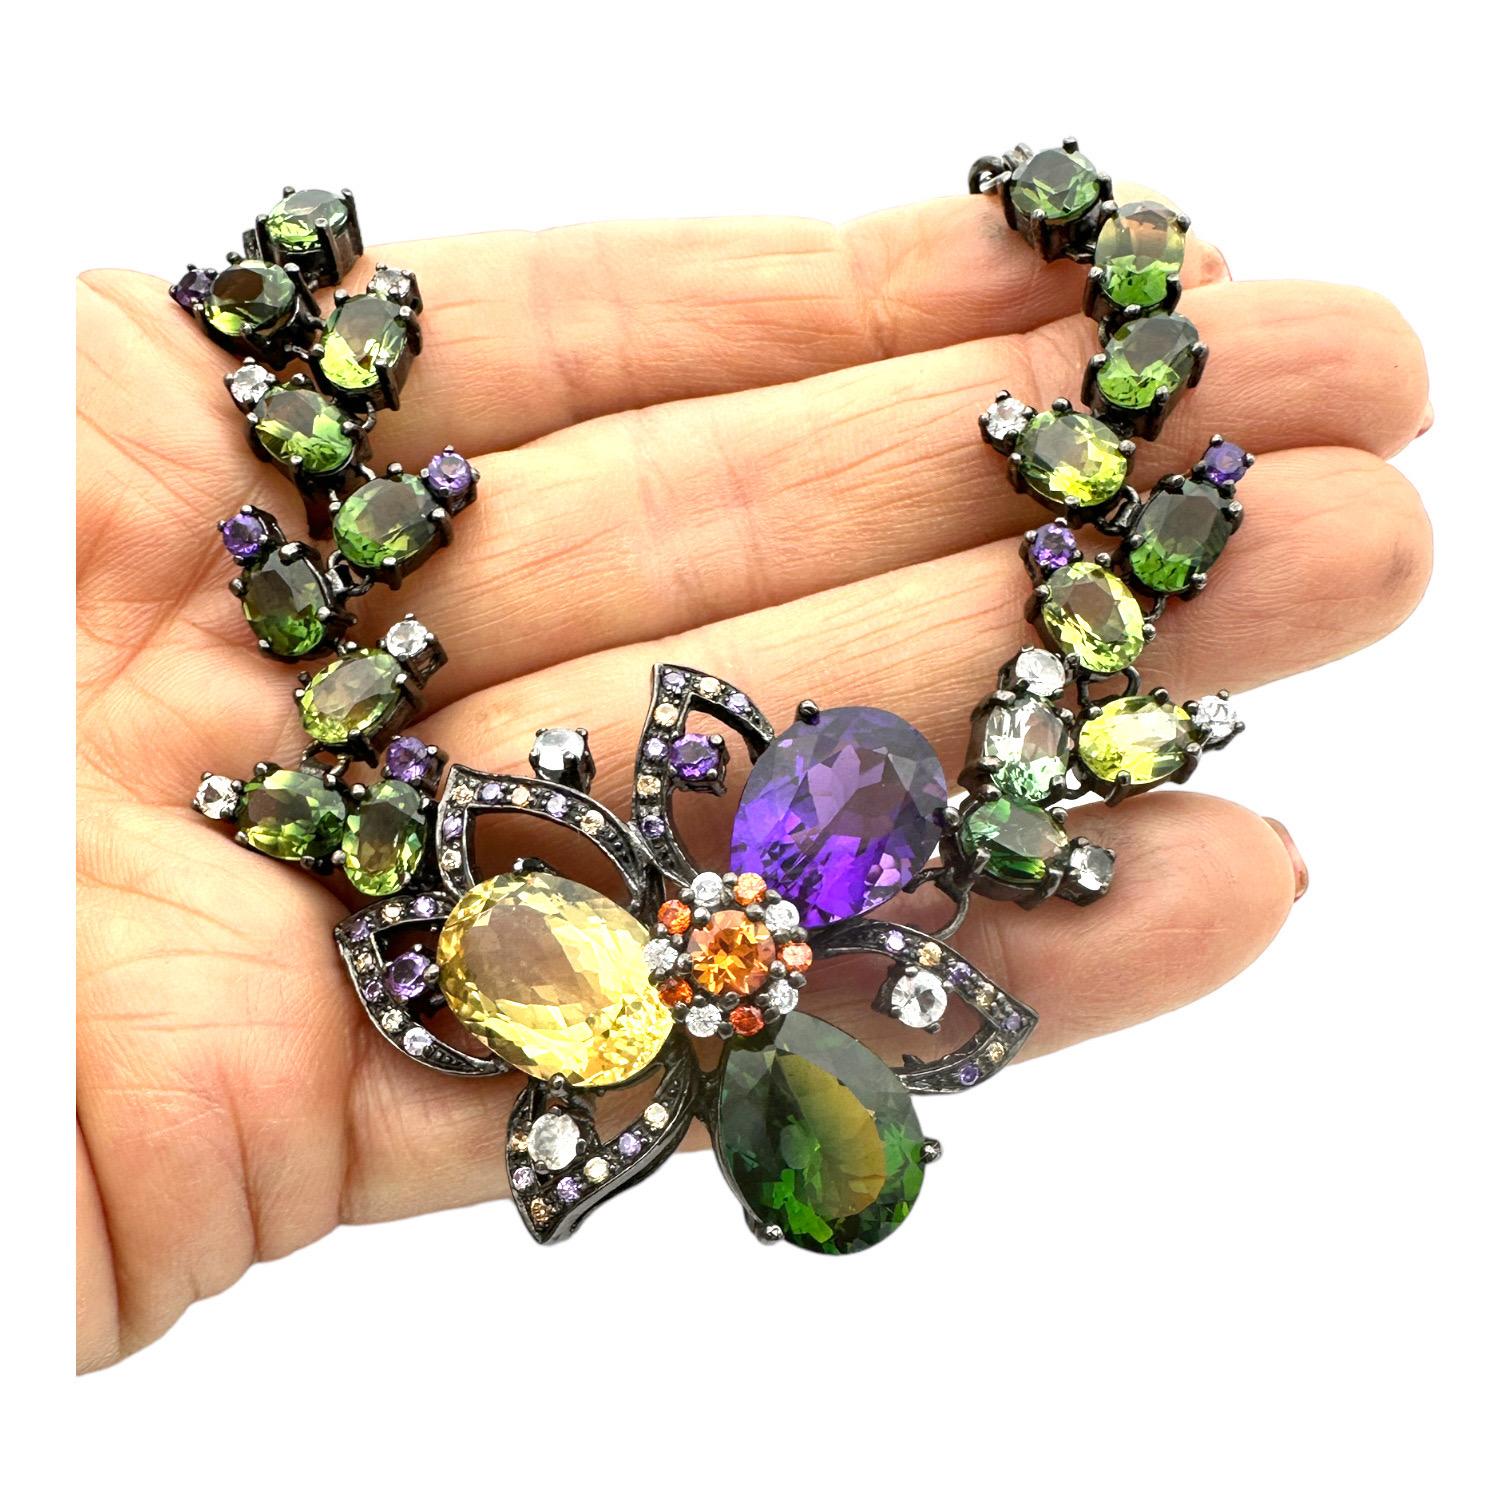 Baroque Revival 75 Carat Colored Gemstone Necklace Black Sterling Silver White Sapphire Necklace For Sale